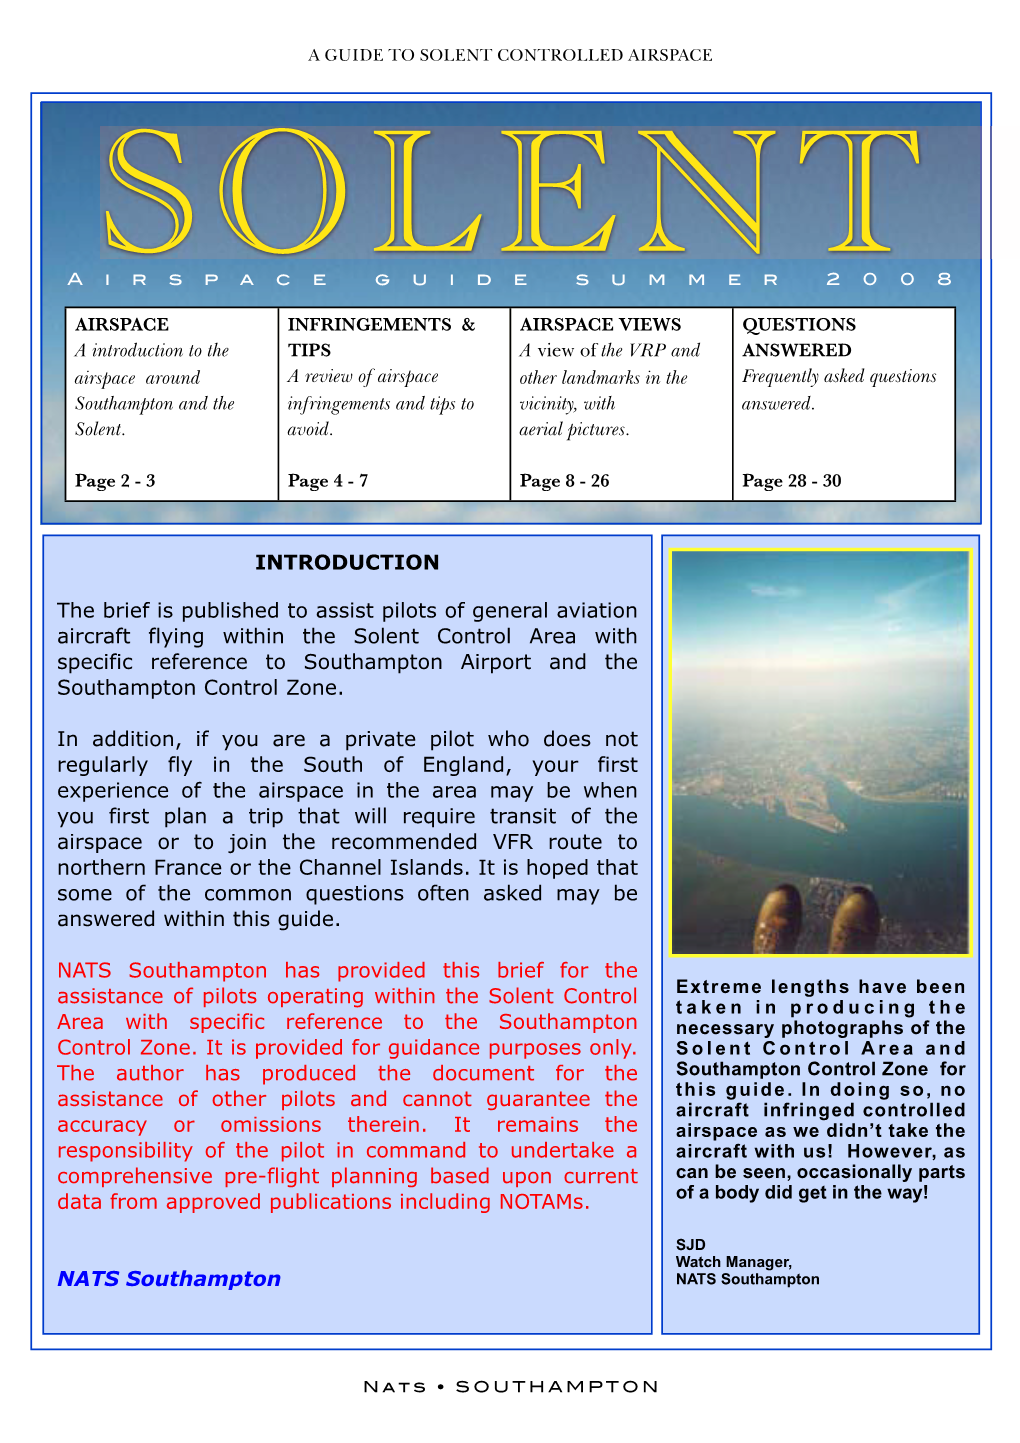 Solent Airspace Guide NATS Southampton Tel Admin : 023 8062 7189 1